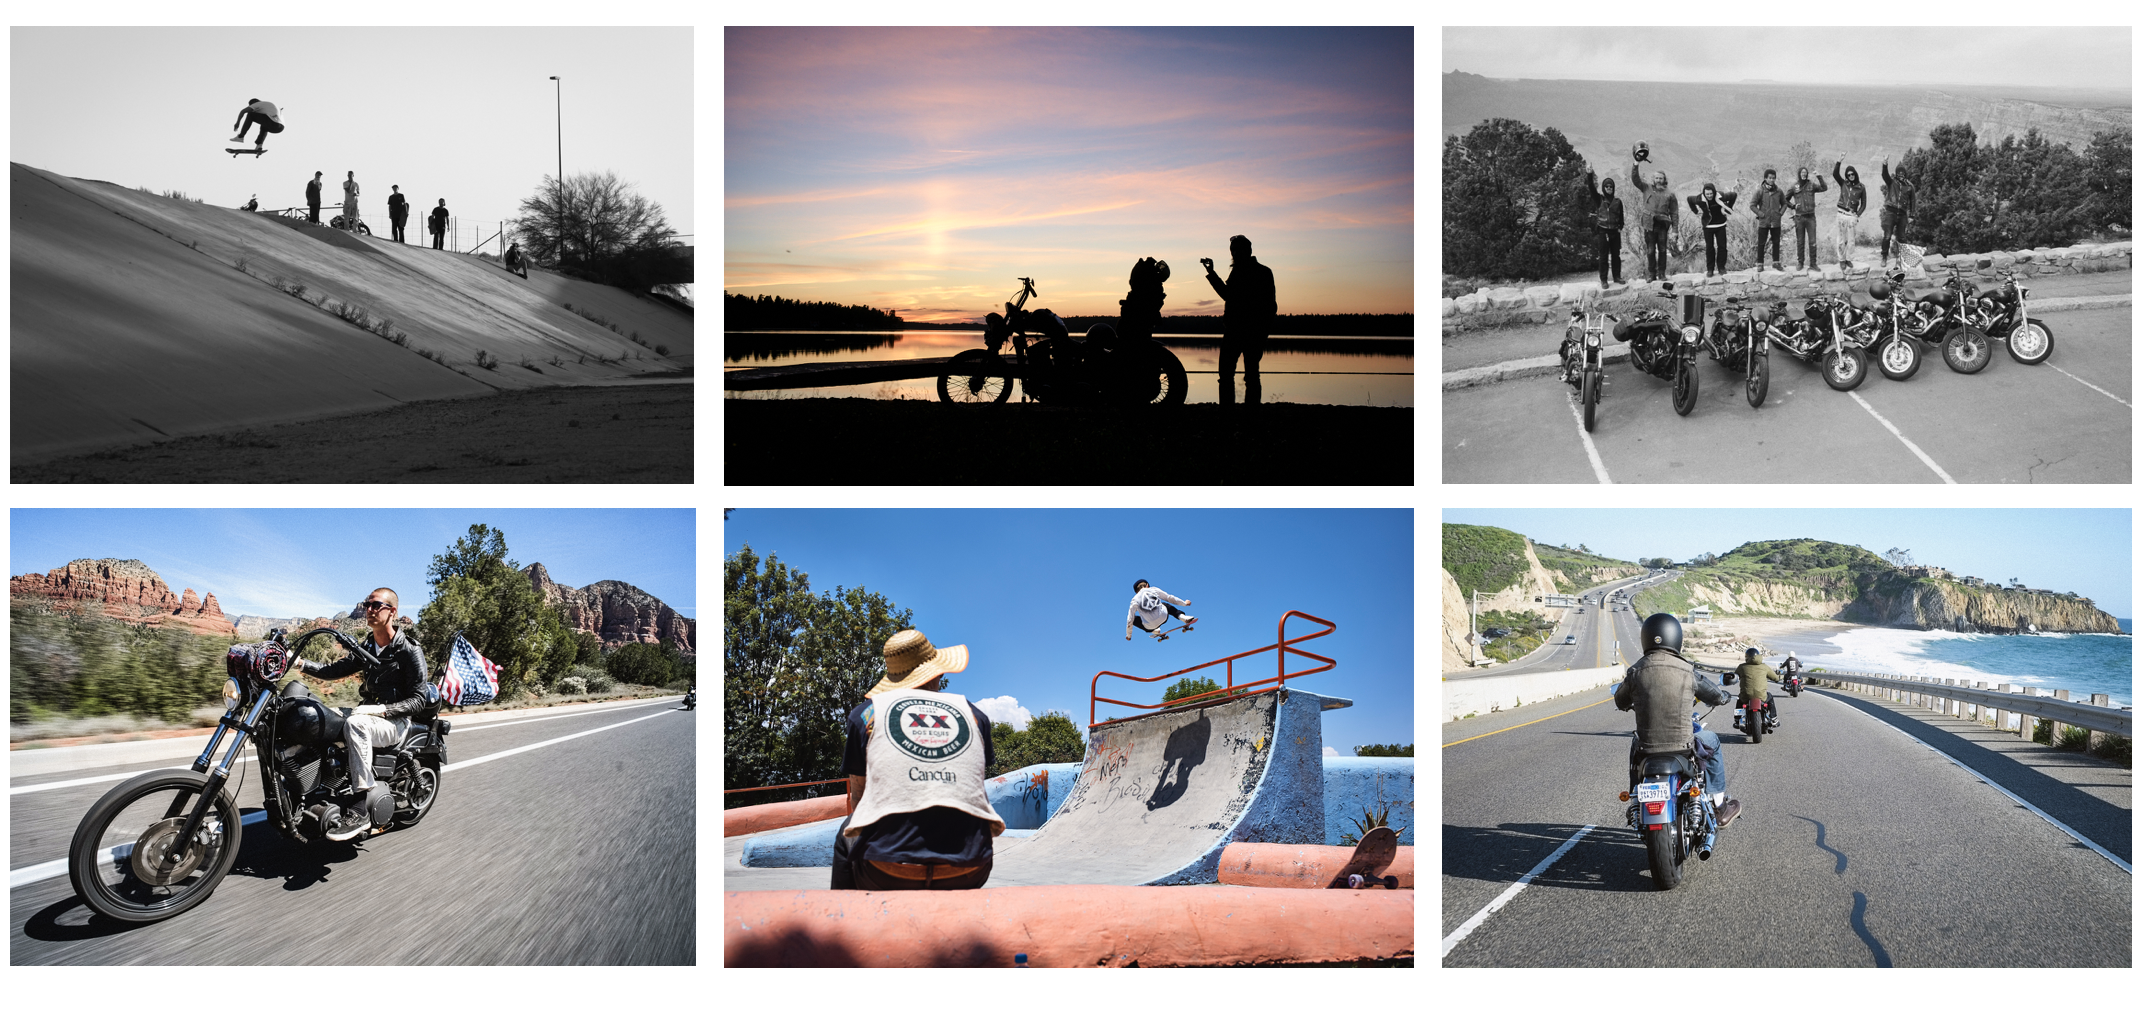 MOTORCYCLING + SKATEBOARDING THROUGH UNITED STATES AND EUROPE